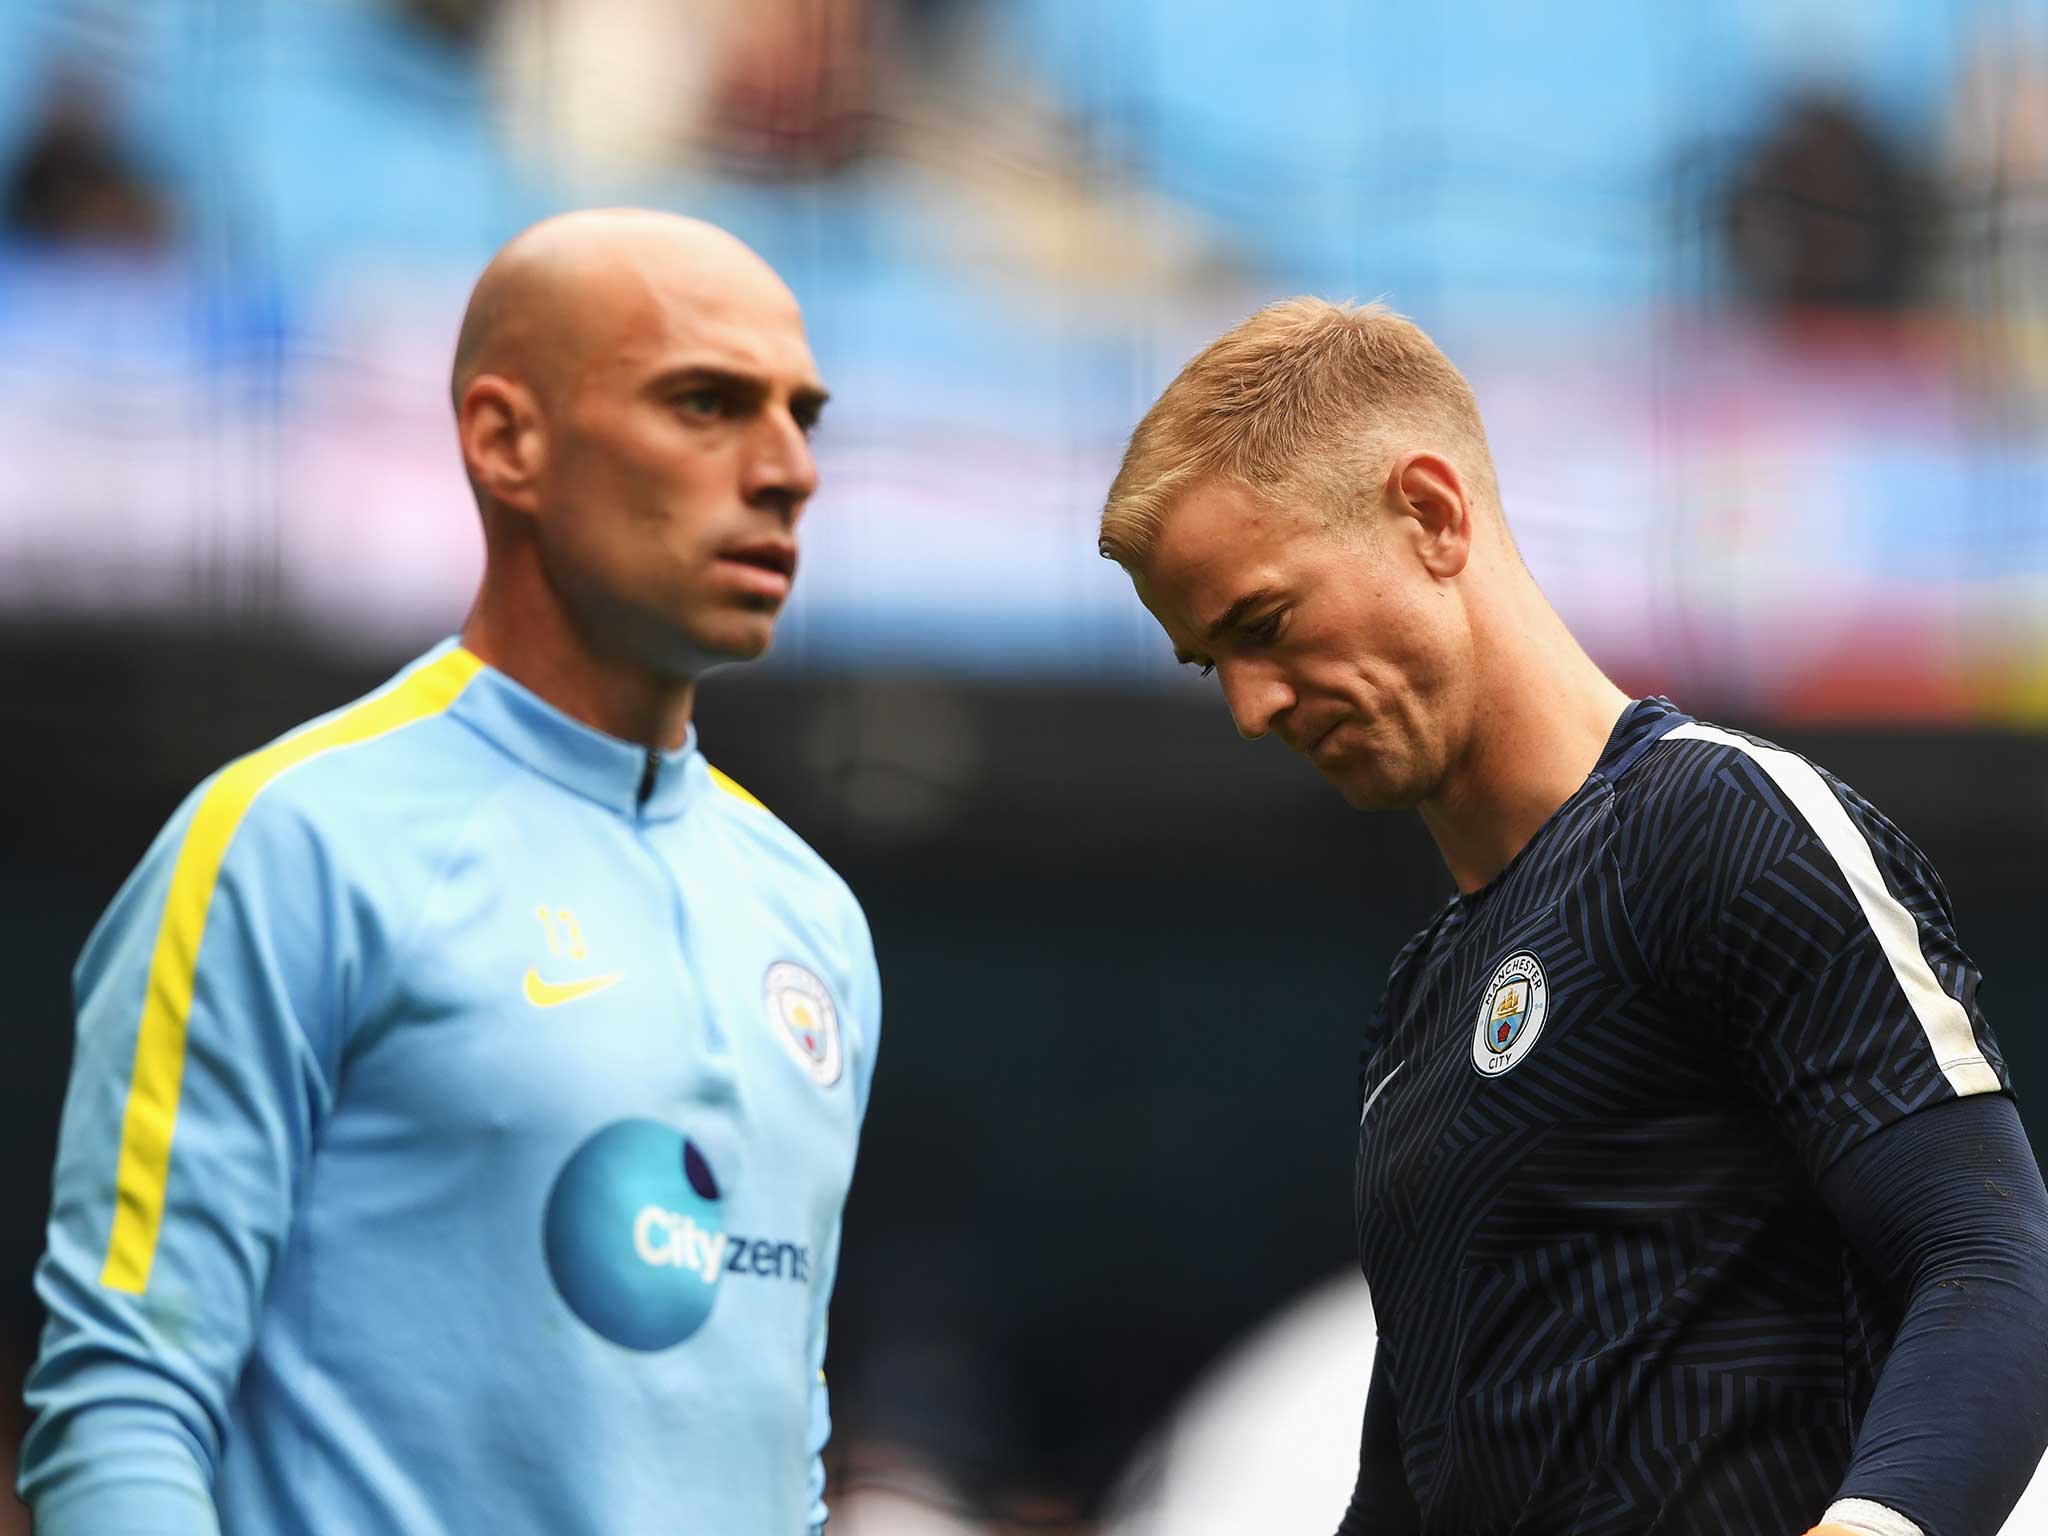 Joe Hart may have to leave Manchester City if he remains on the bench